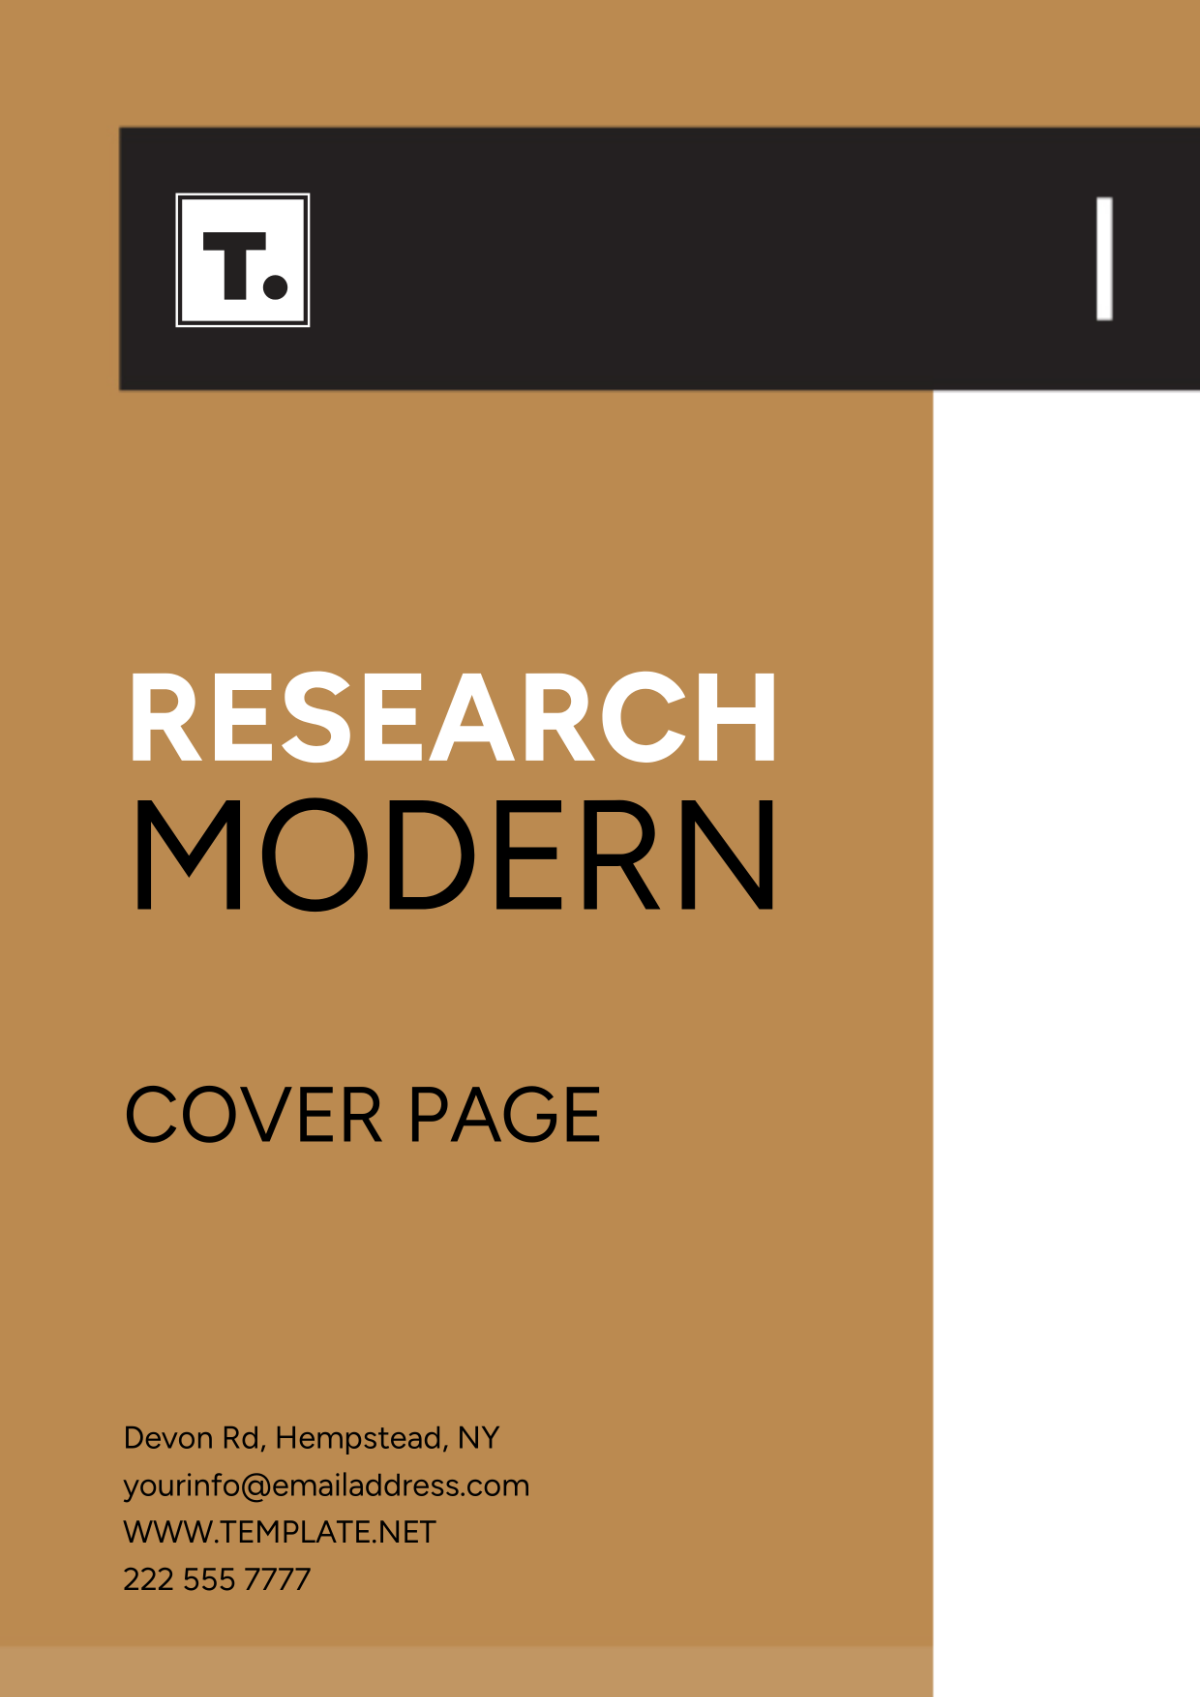 Research Modern Cover Page